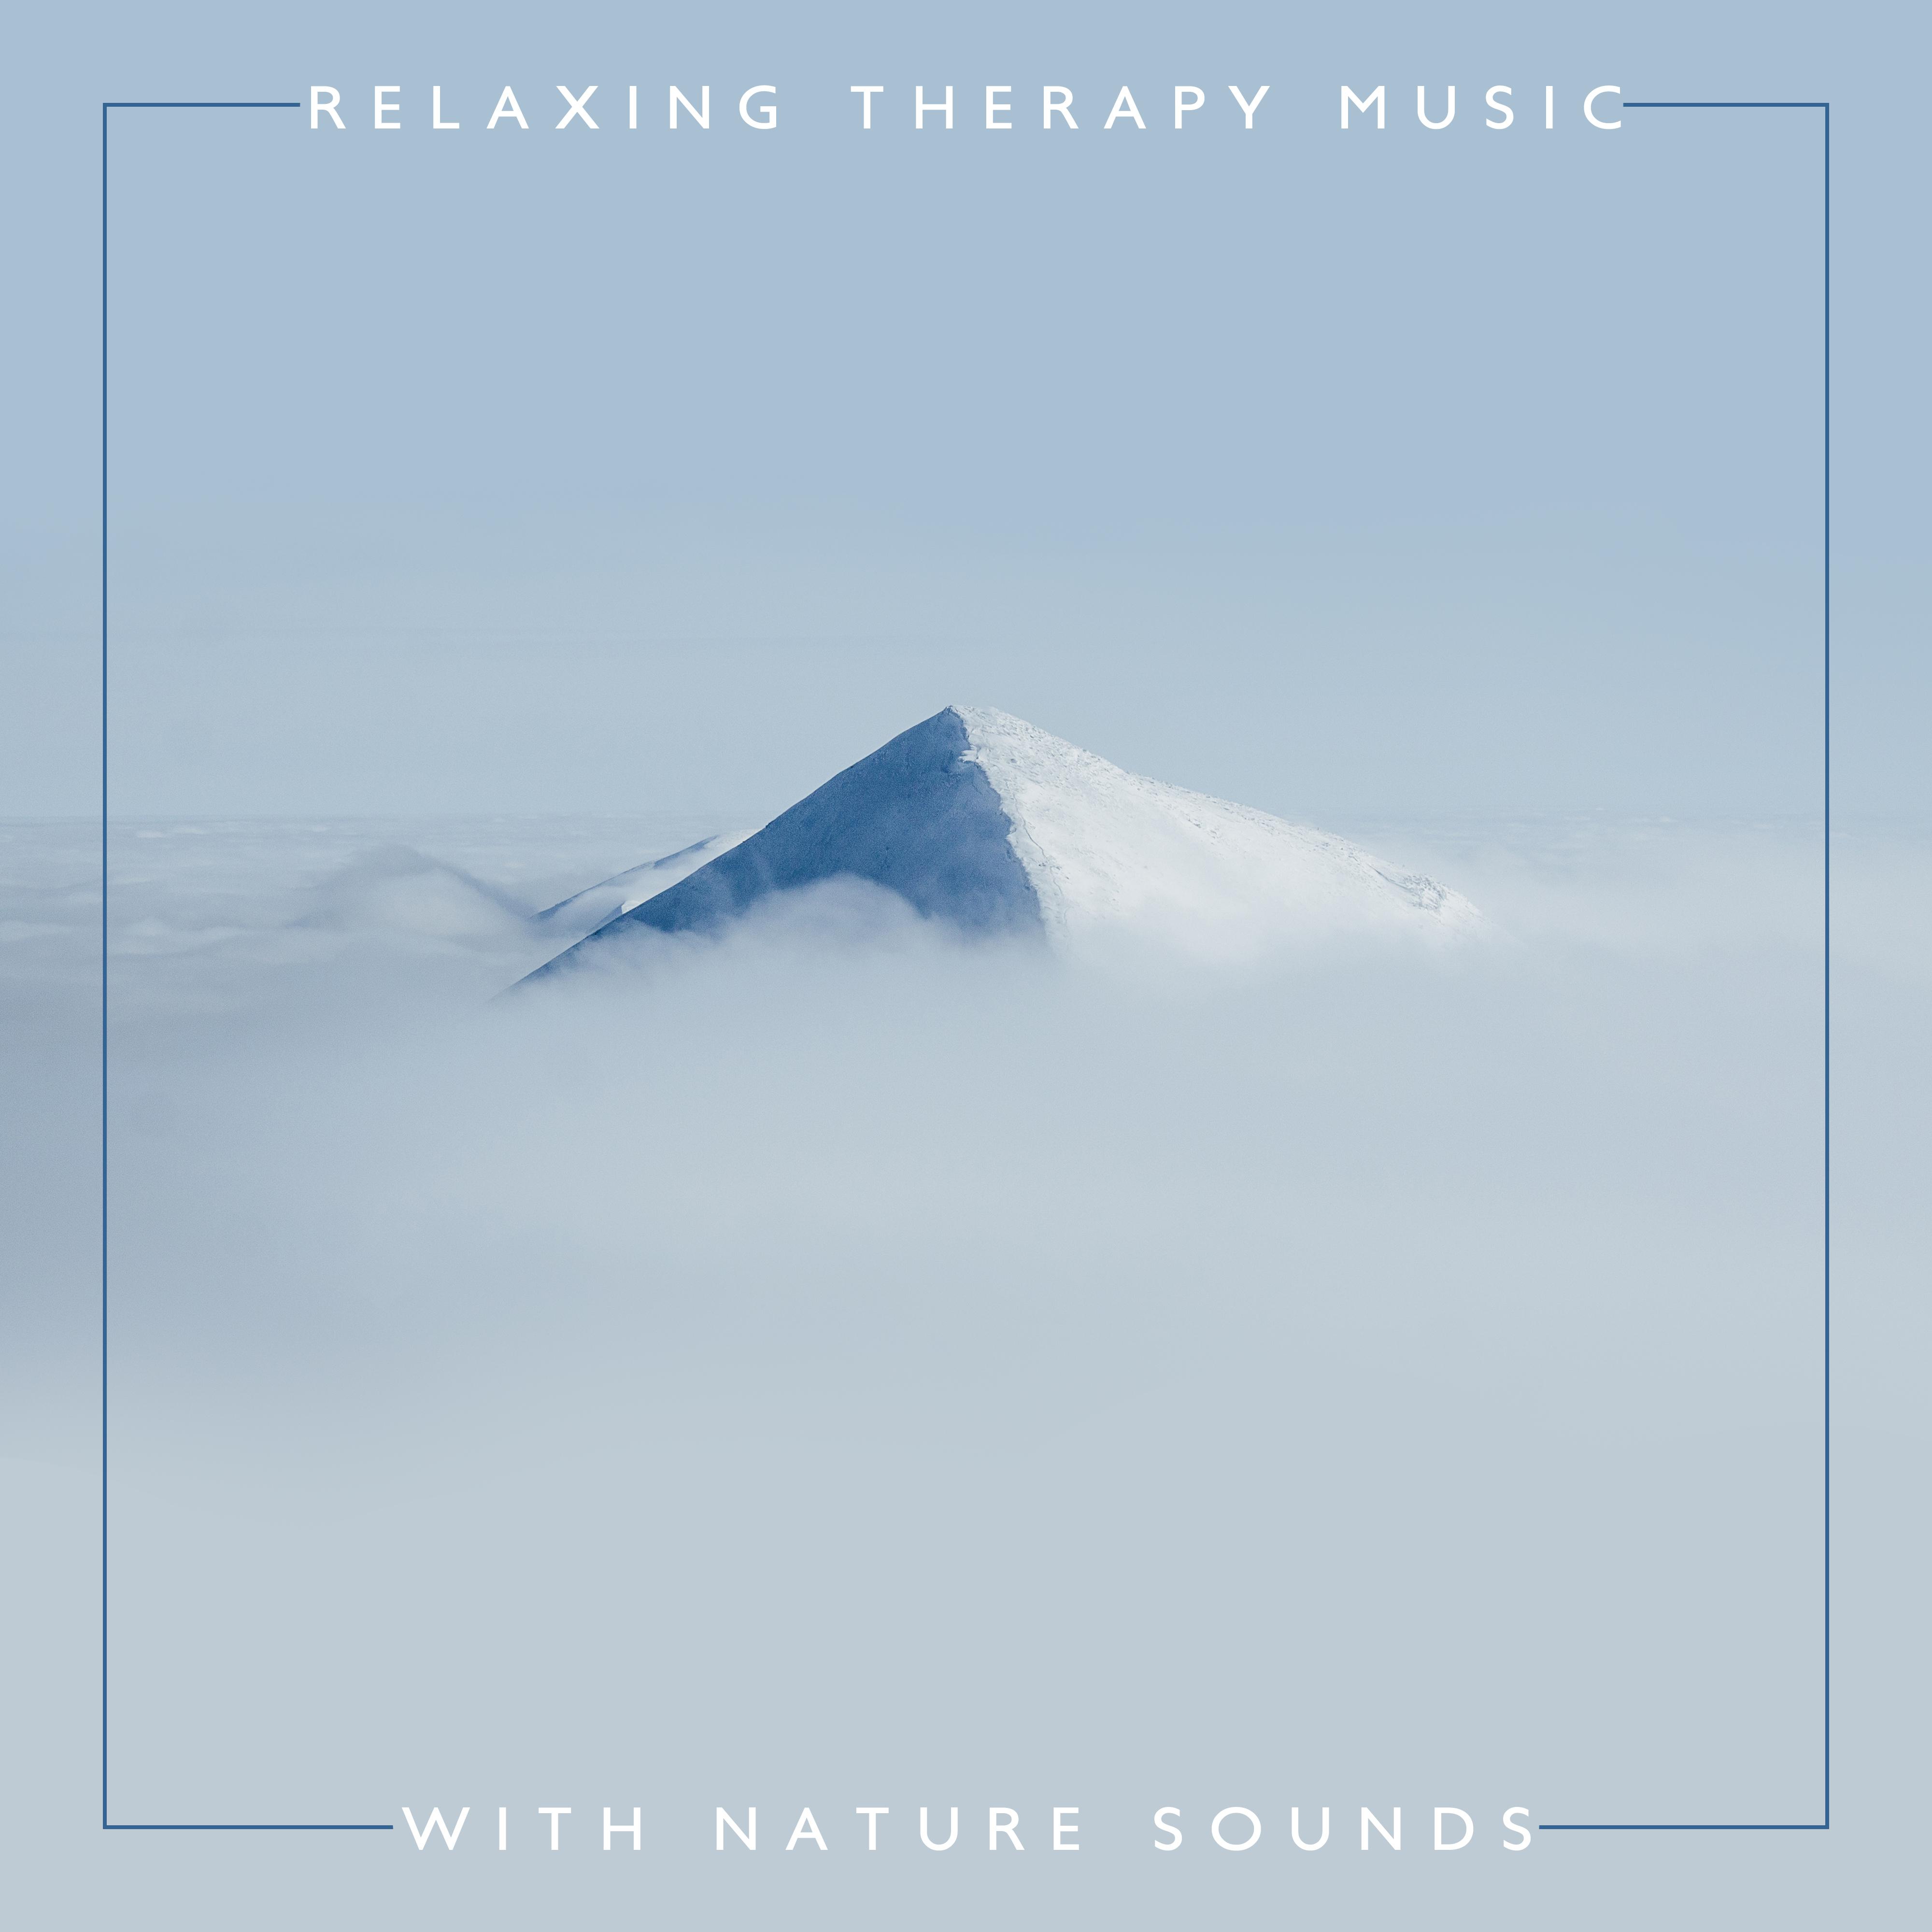 Relaxing Therapy Music with Nature Sounds: Meditation, Relaxation & Calming Down New Age Songs with Water, Forest & Birds Sounds